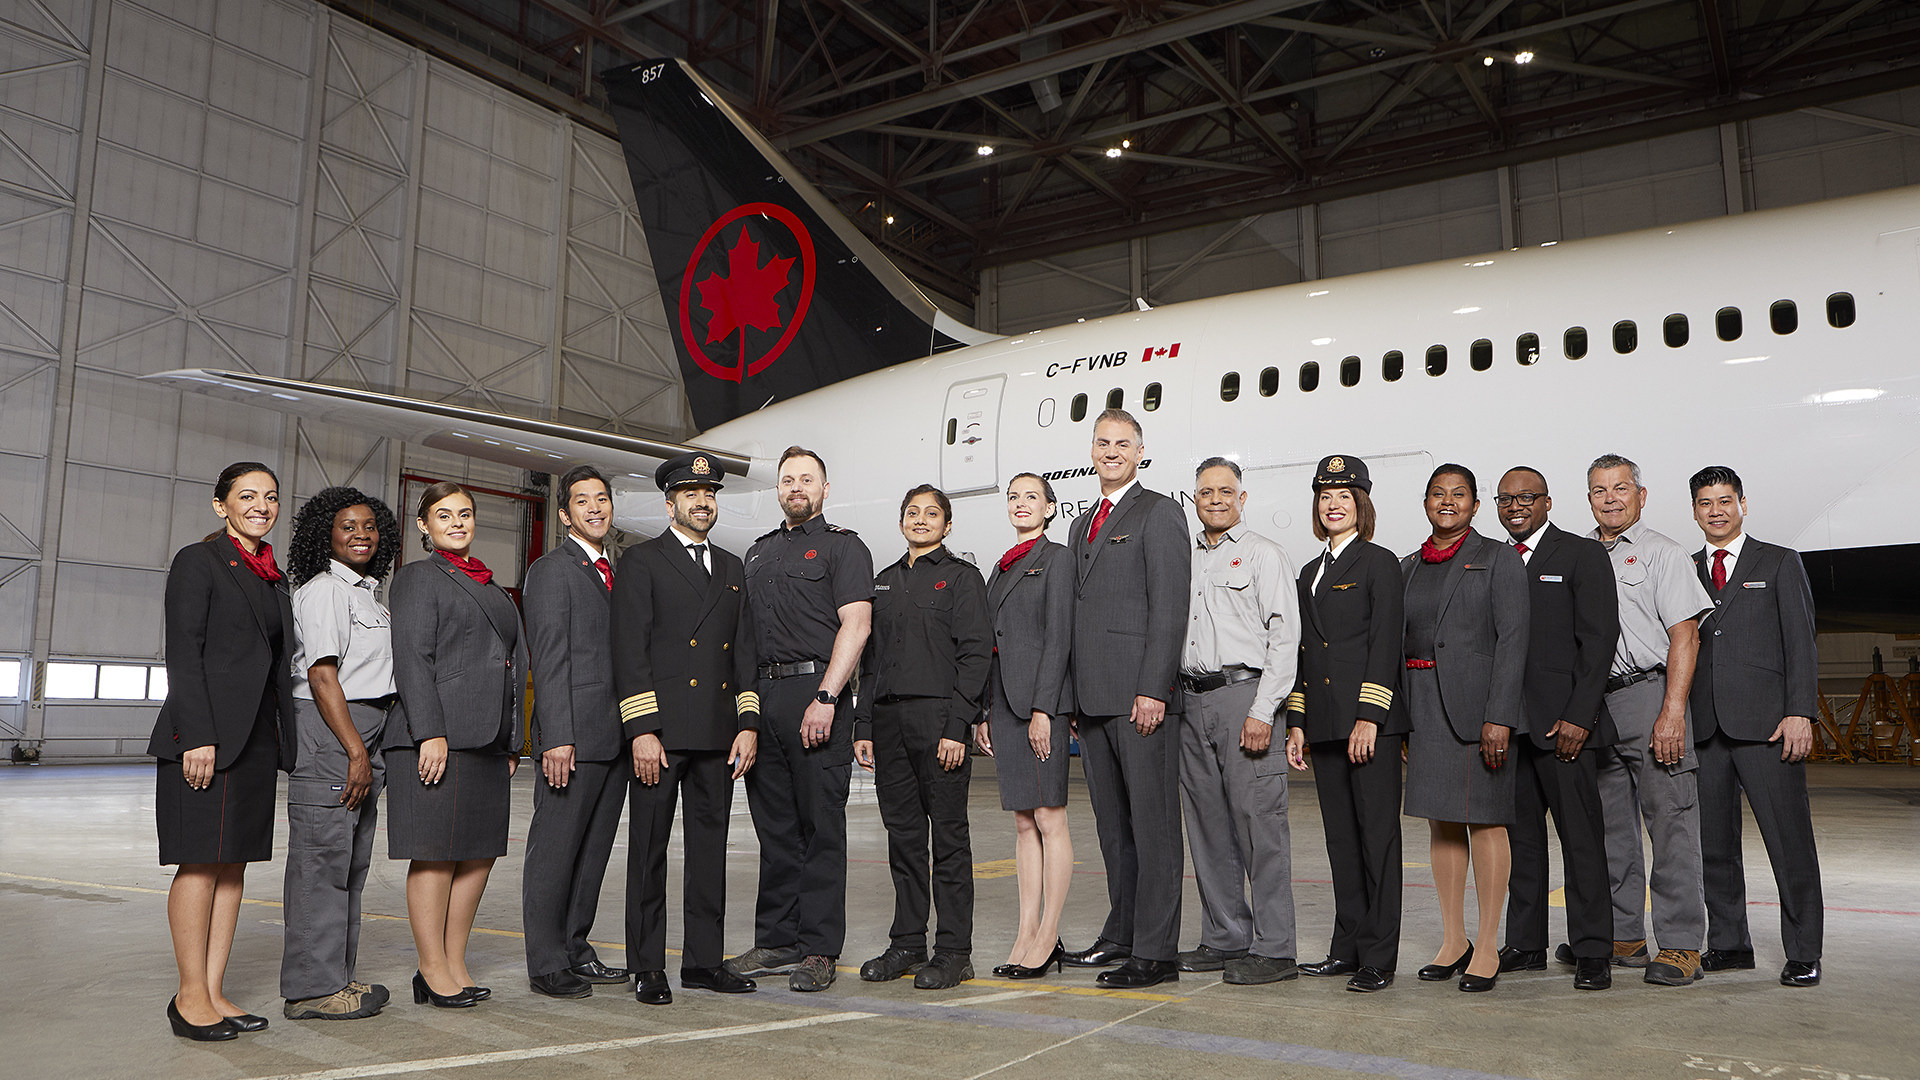 In selecting Air Canada, Mediacorp Canada Inc. cited the airline’s continuing work to foster inclusiveness through numerous partnerships, its success outreaching directly to diverse communities when recruiting and other initiatives. Air Canada Photo